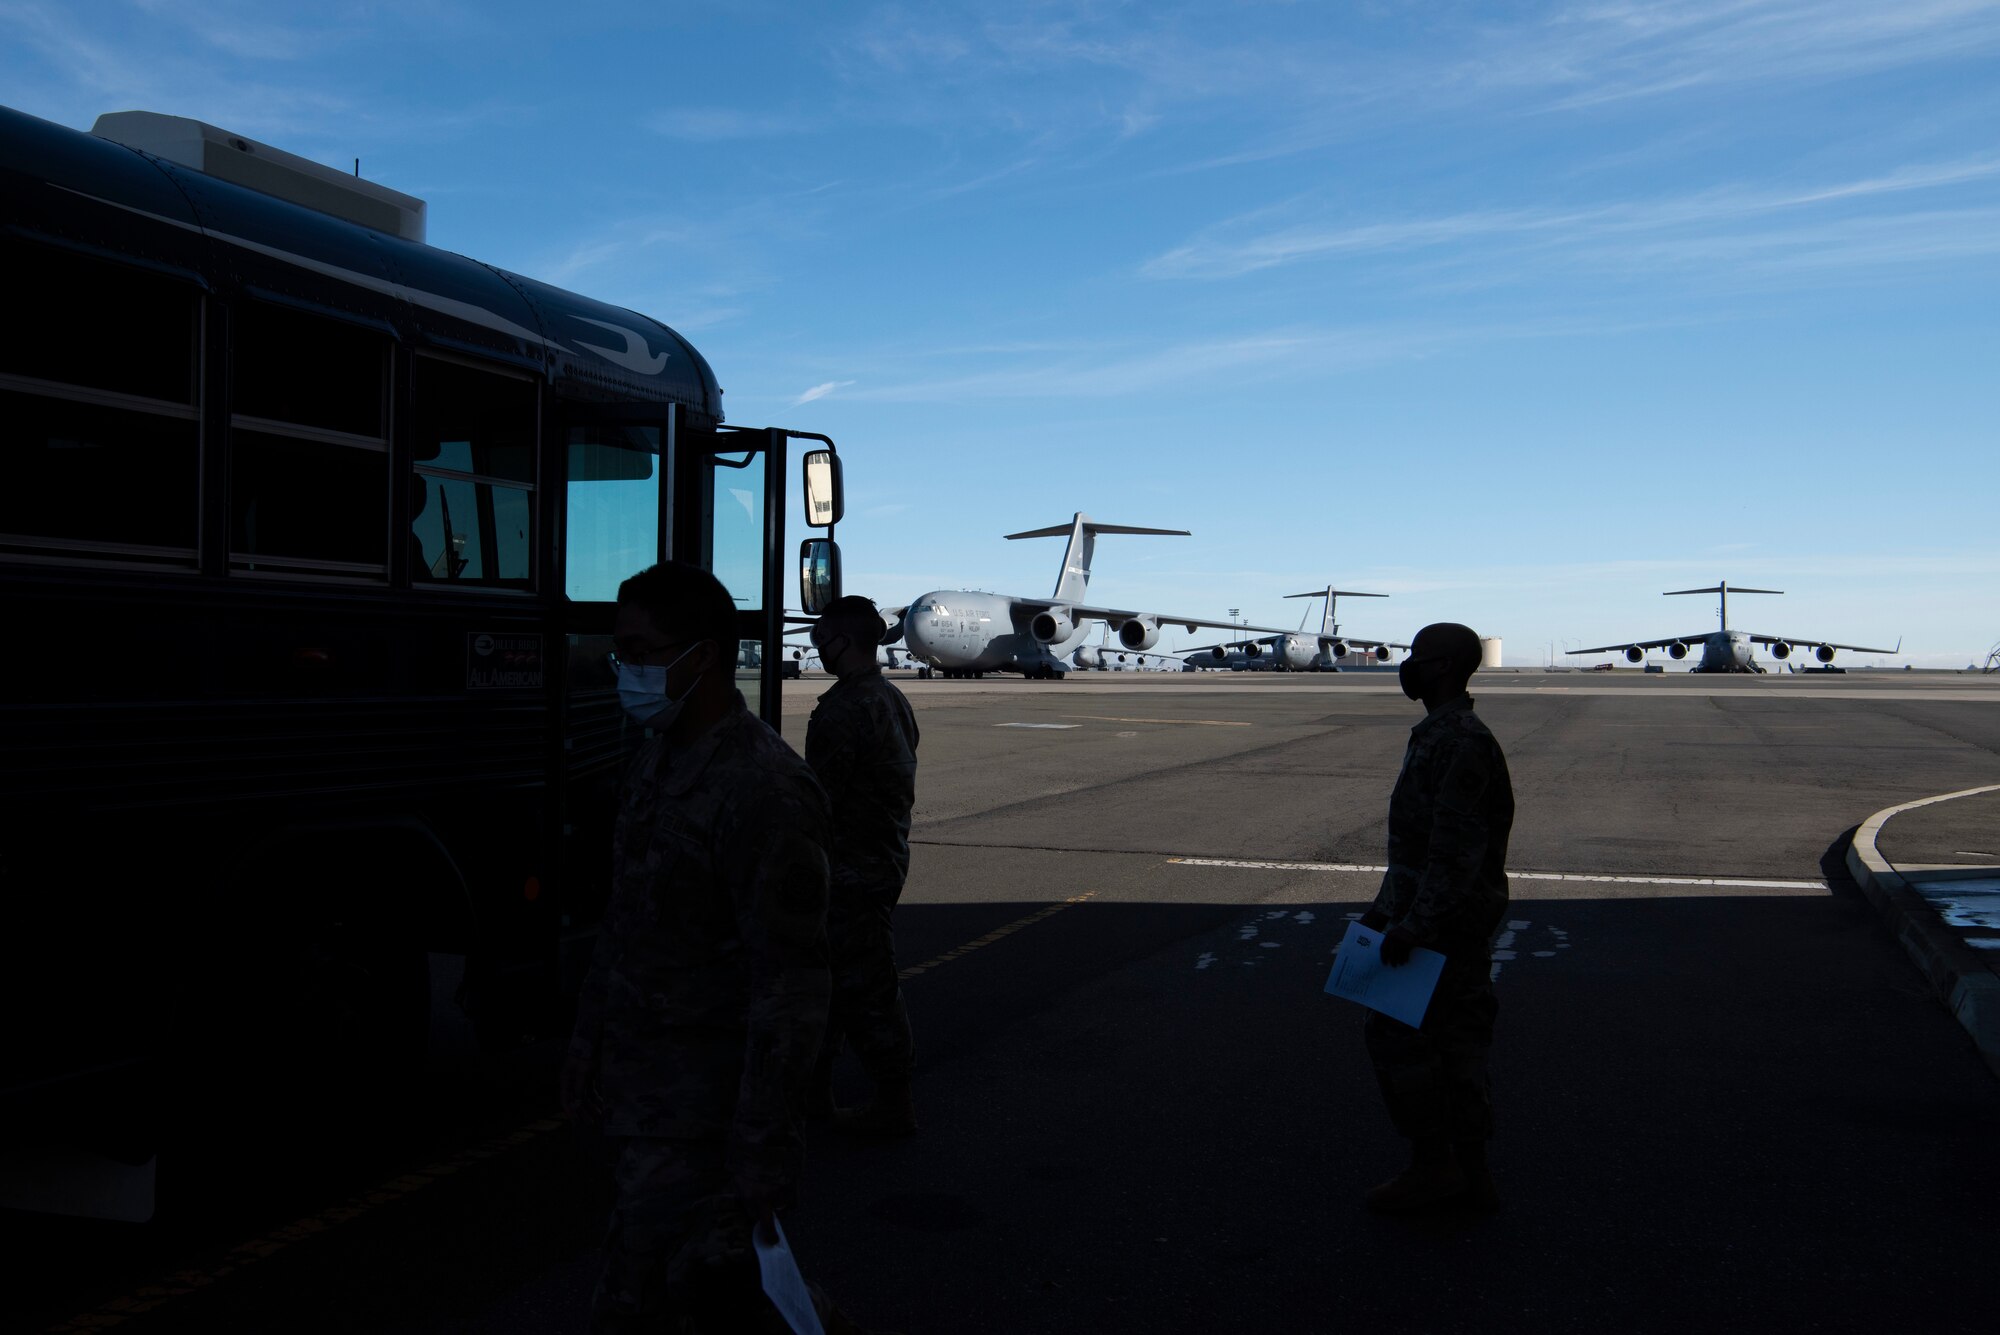 U.S. Airmen board a bus to travel from the influenza vaccine point of distribution in a hangar Jan. 14, 2021, at Travis Air Force Base, California. The POD is an organized way of efficiently distributing a vaccine to a large amount of people and preparing medical personnel for future large-scale distributions such as the COVID-19 Vaccine. (U.S. Air Force photo by Airman 1st Class Alexander Merchak)